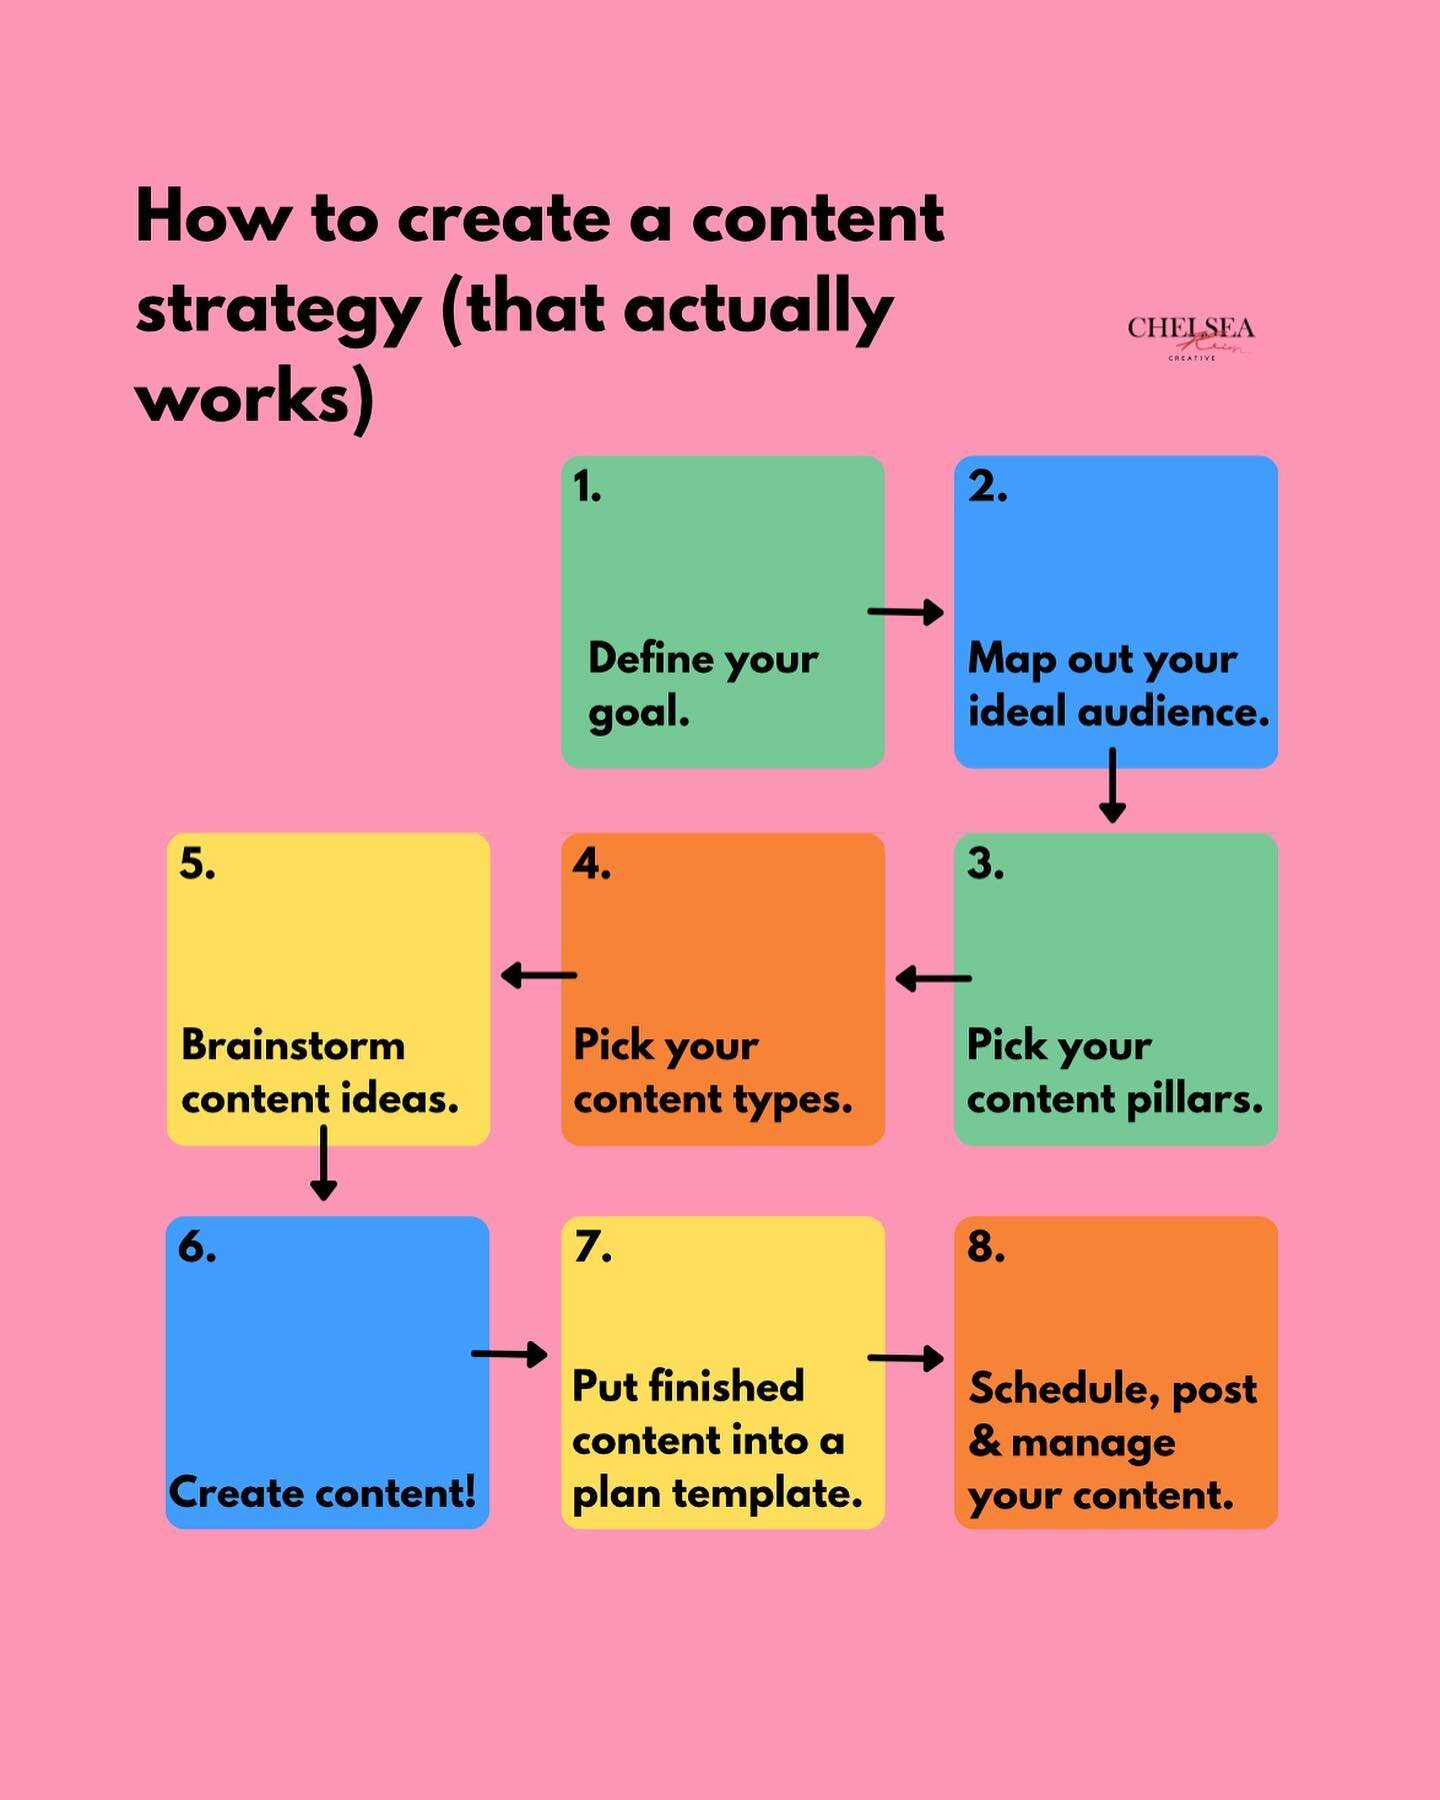 Steal my tactics!! This is exactly how I define a content strategy for my clients and trust me it works!

And yes, it really only does take 8 simple steps 😱🙌🏻

Your content will never be seen by the right eyes or perform well if you aren&rsquo;t c